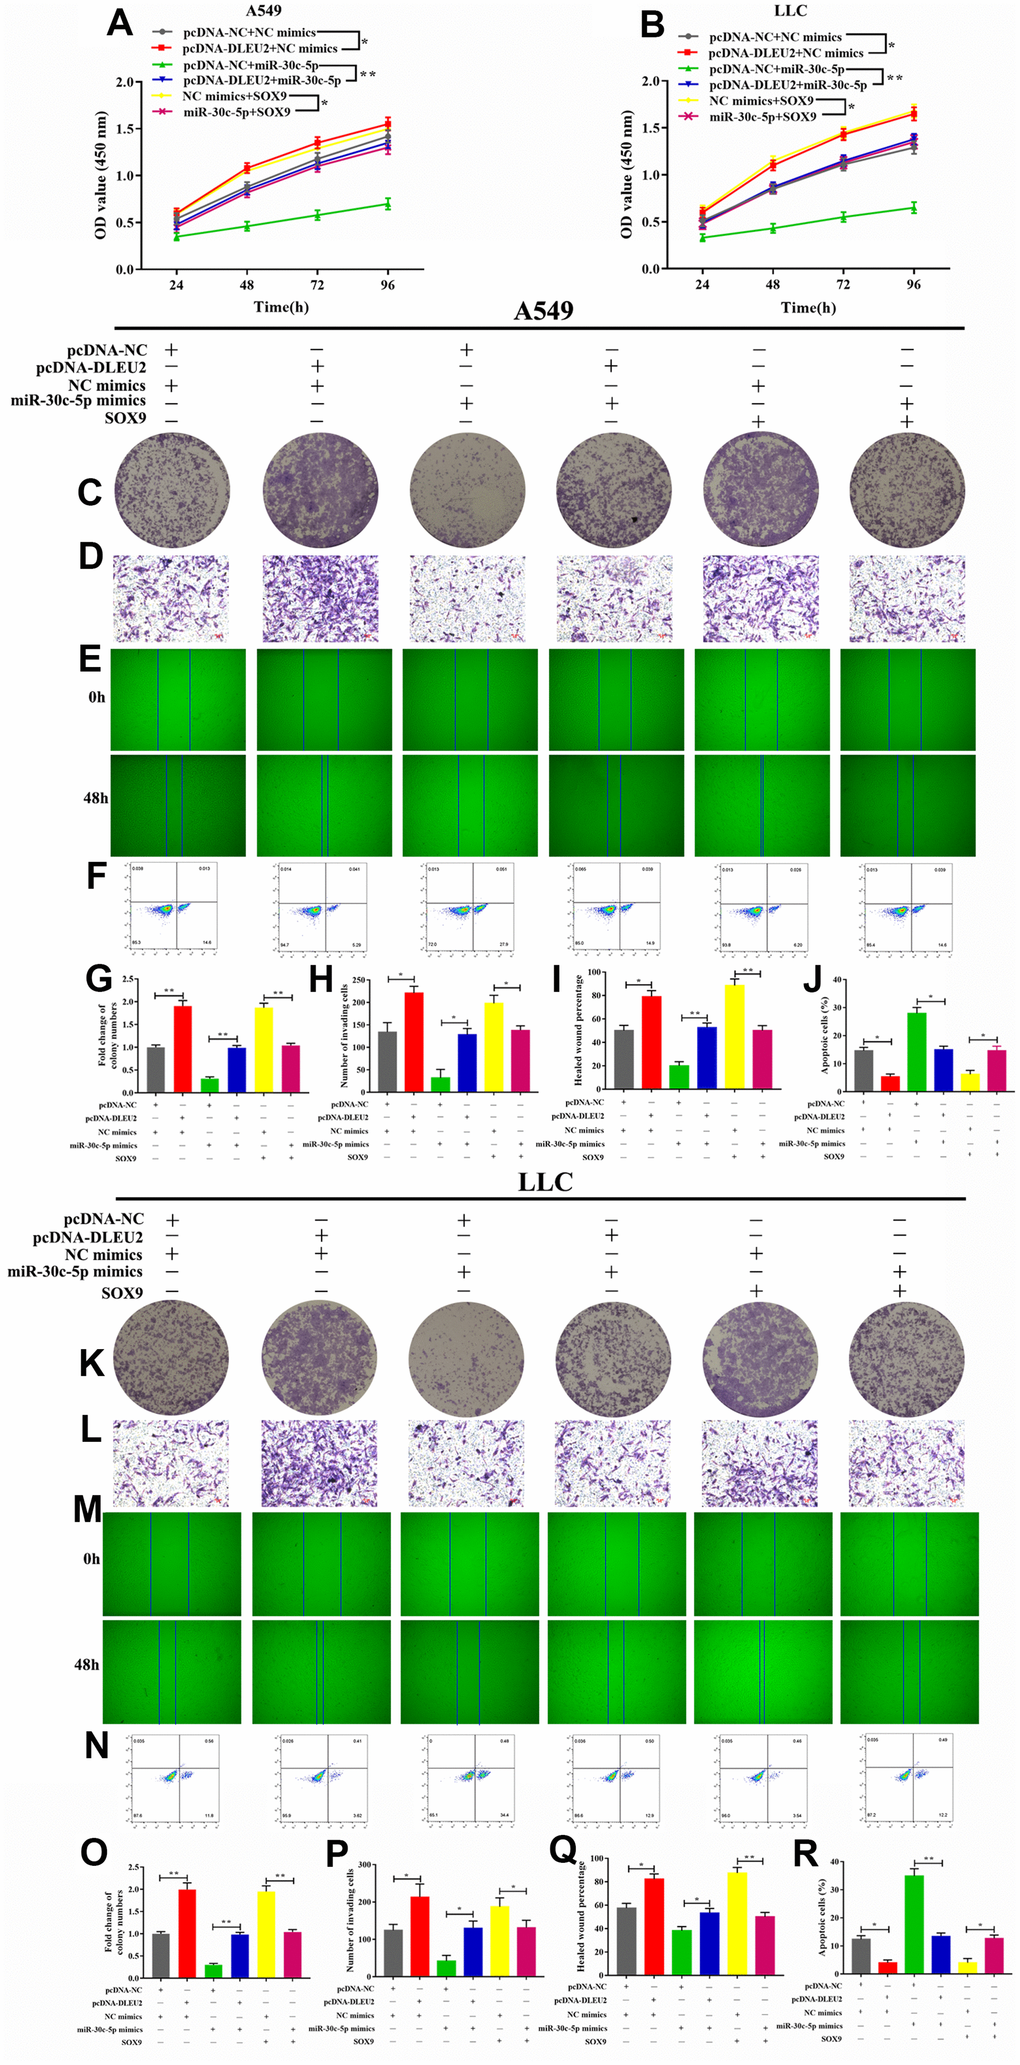 Effect of lncRNA/miR-30c-5p/SOX9 axis on cell proliferation, invasion, migration, and apoptosis. (A–B) Cell viability was determined by CCK-8 assay; (C, G, K, O) The colony formatting assay was used to evaluate the proliferation activity of A549 and LLC cells; (D, H, L, P) The invasive ability of A549 and LLC cells were detected by Transwell assay; (E, I, M, Q) The migration abilities of tumor cells were assessed by wound healing assay; (F, J, N, R) Flow cytometric analysis of apoptosis in A549 and LLC cells; *p**p***p